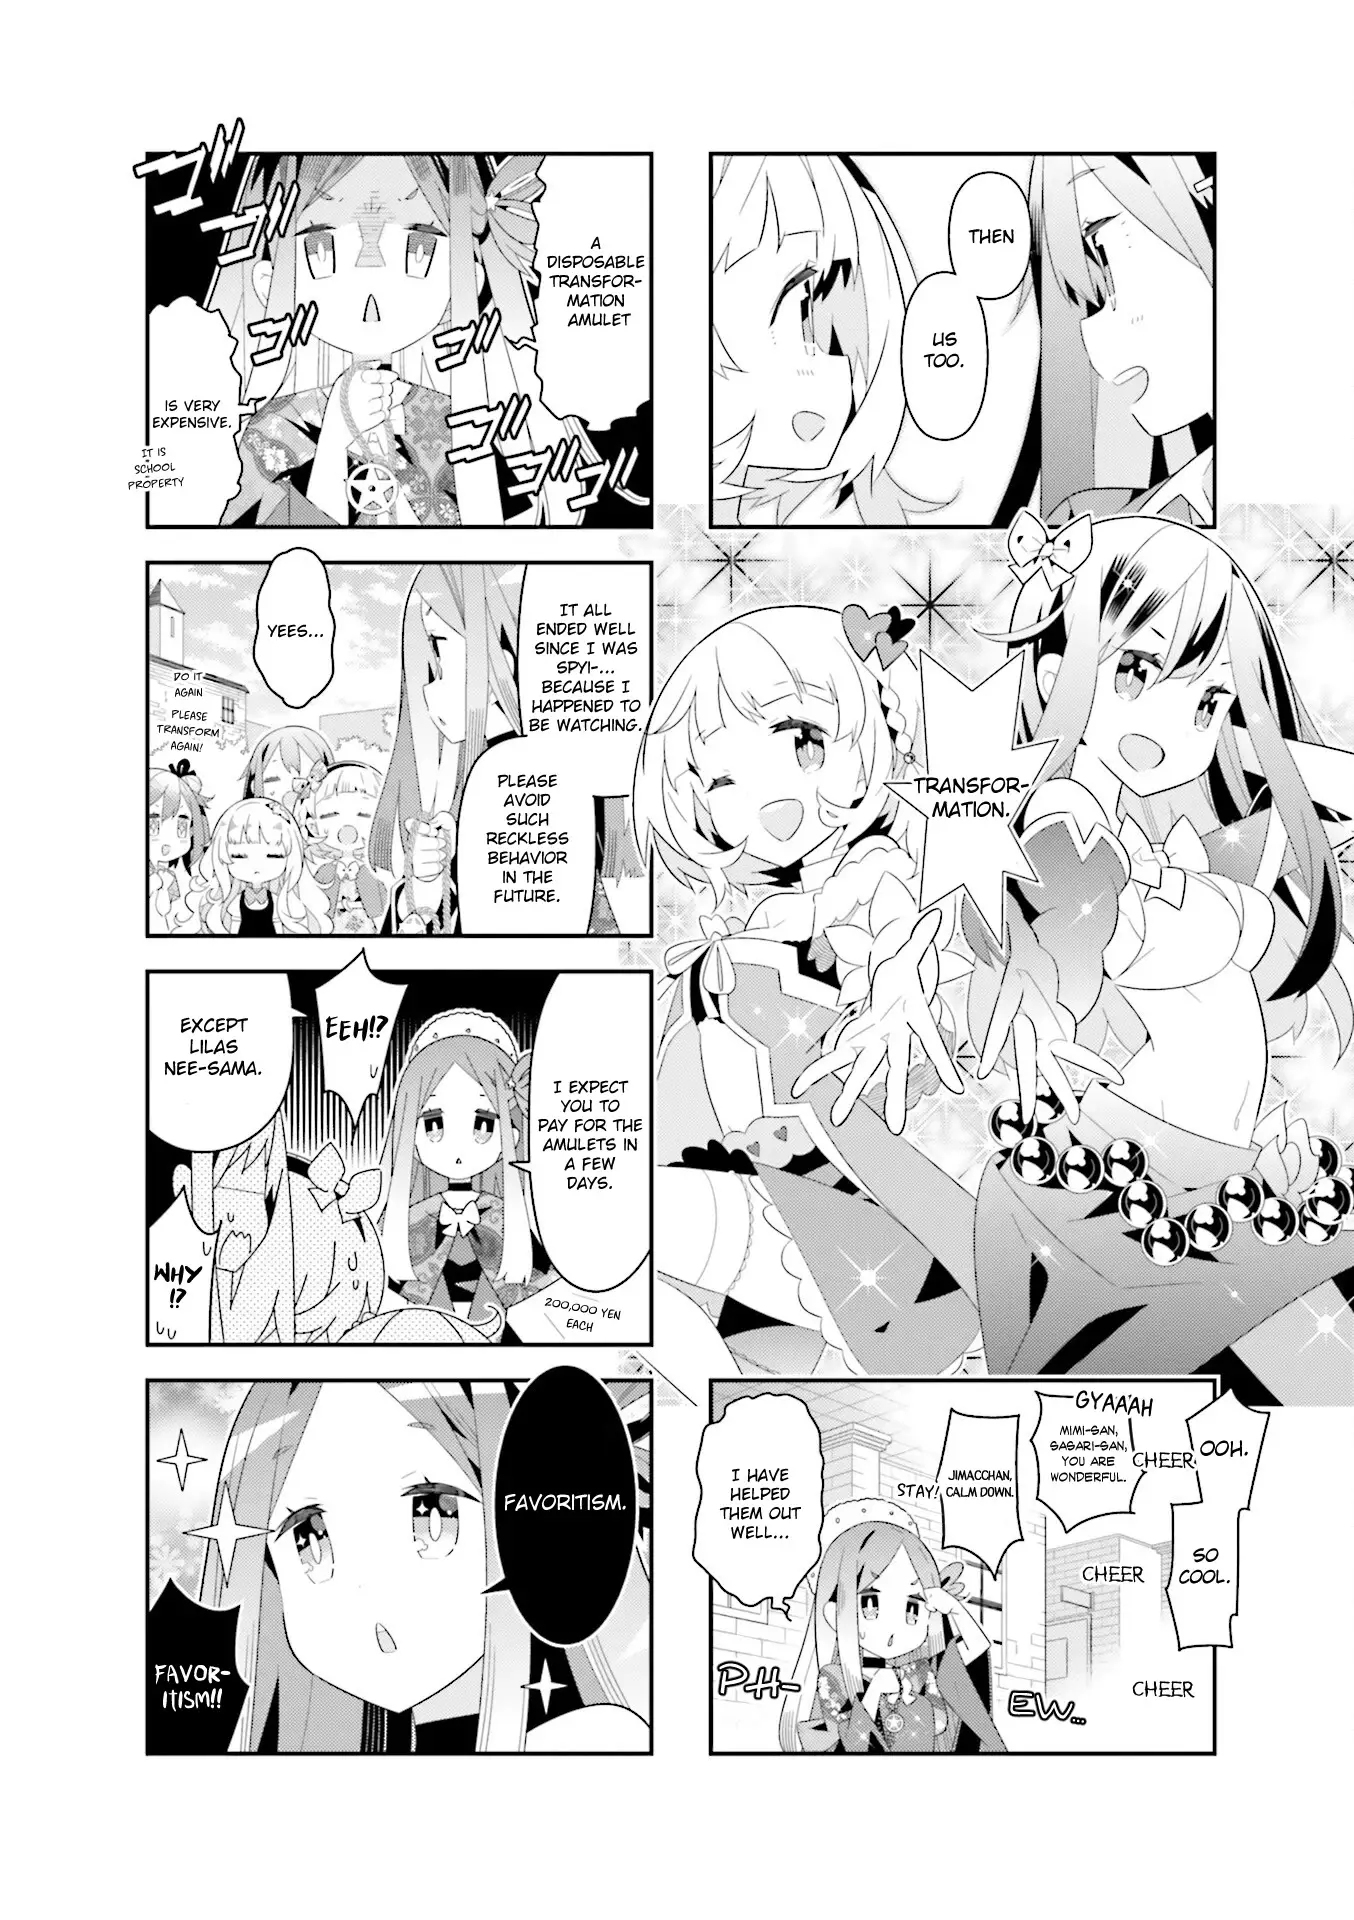 The Life After Retirement Of Magical Girls - 20 page 8-8b245d15